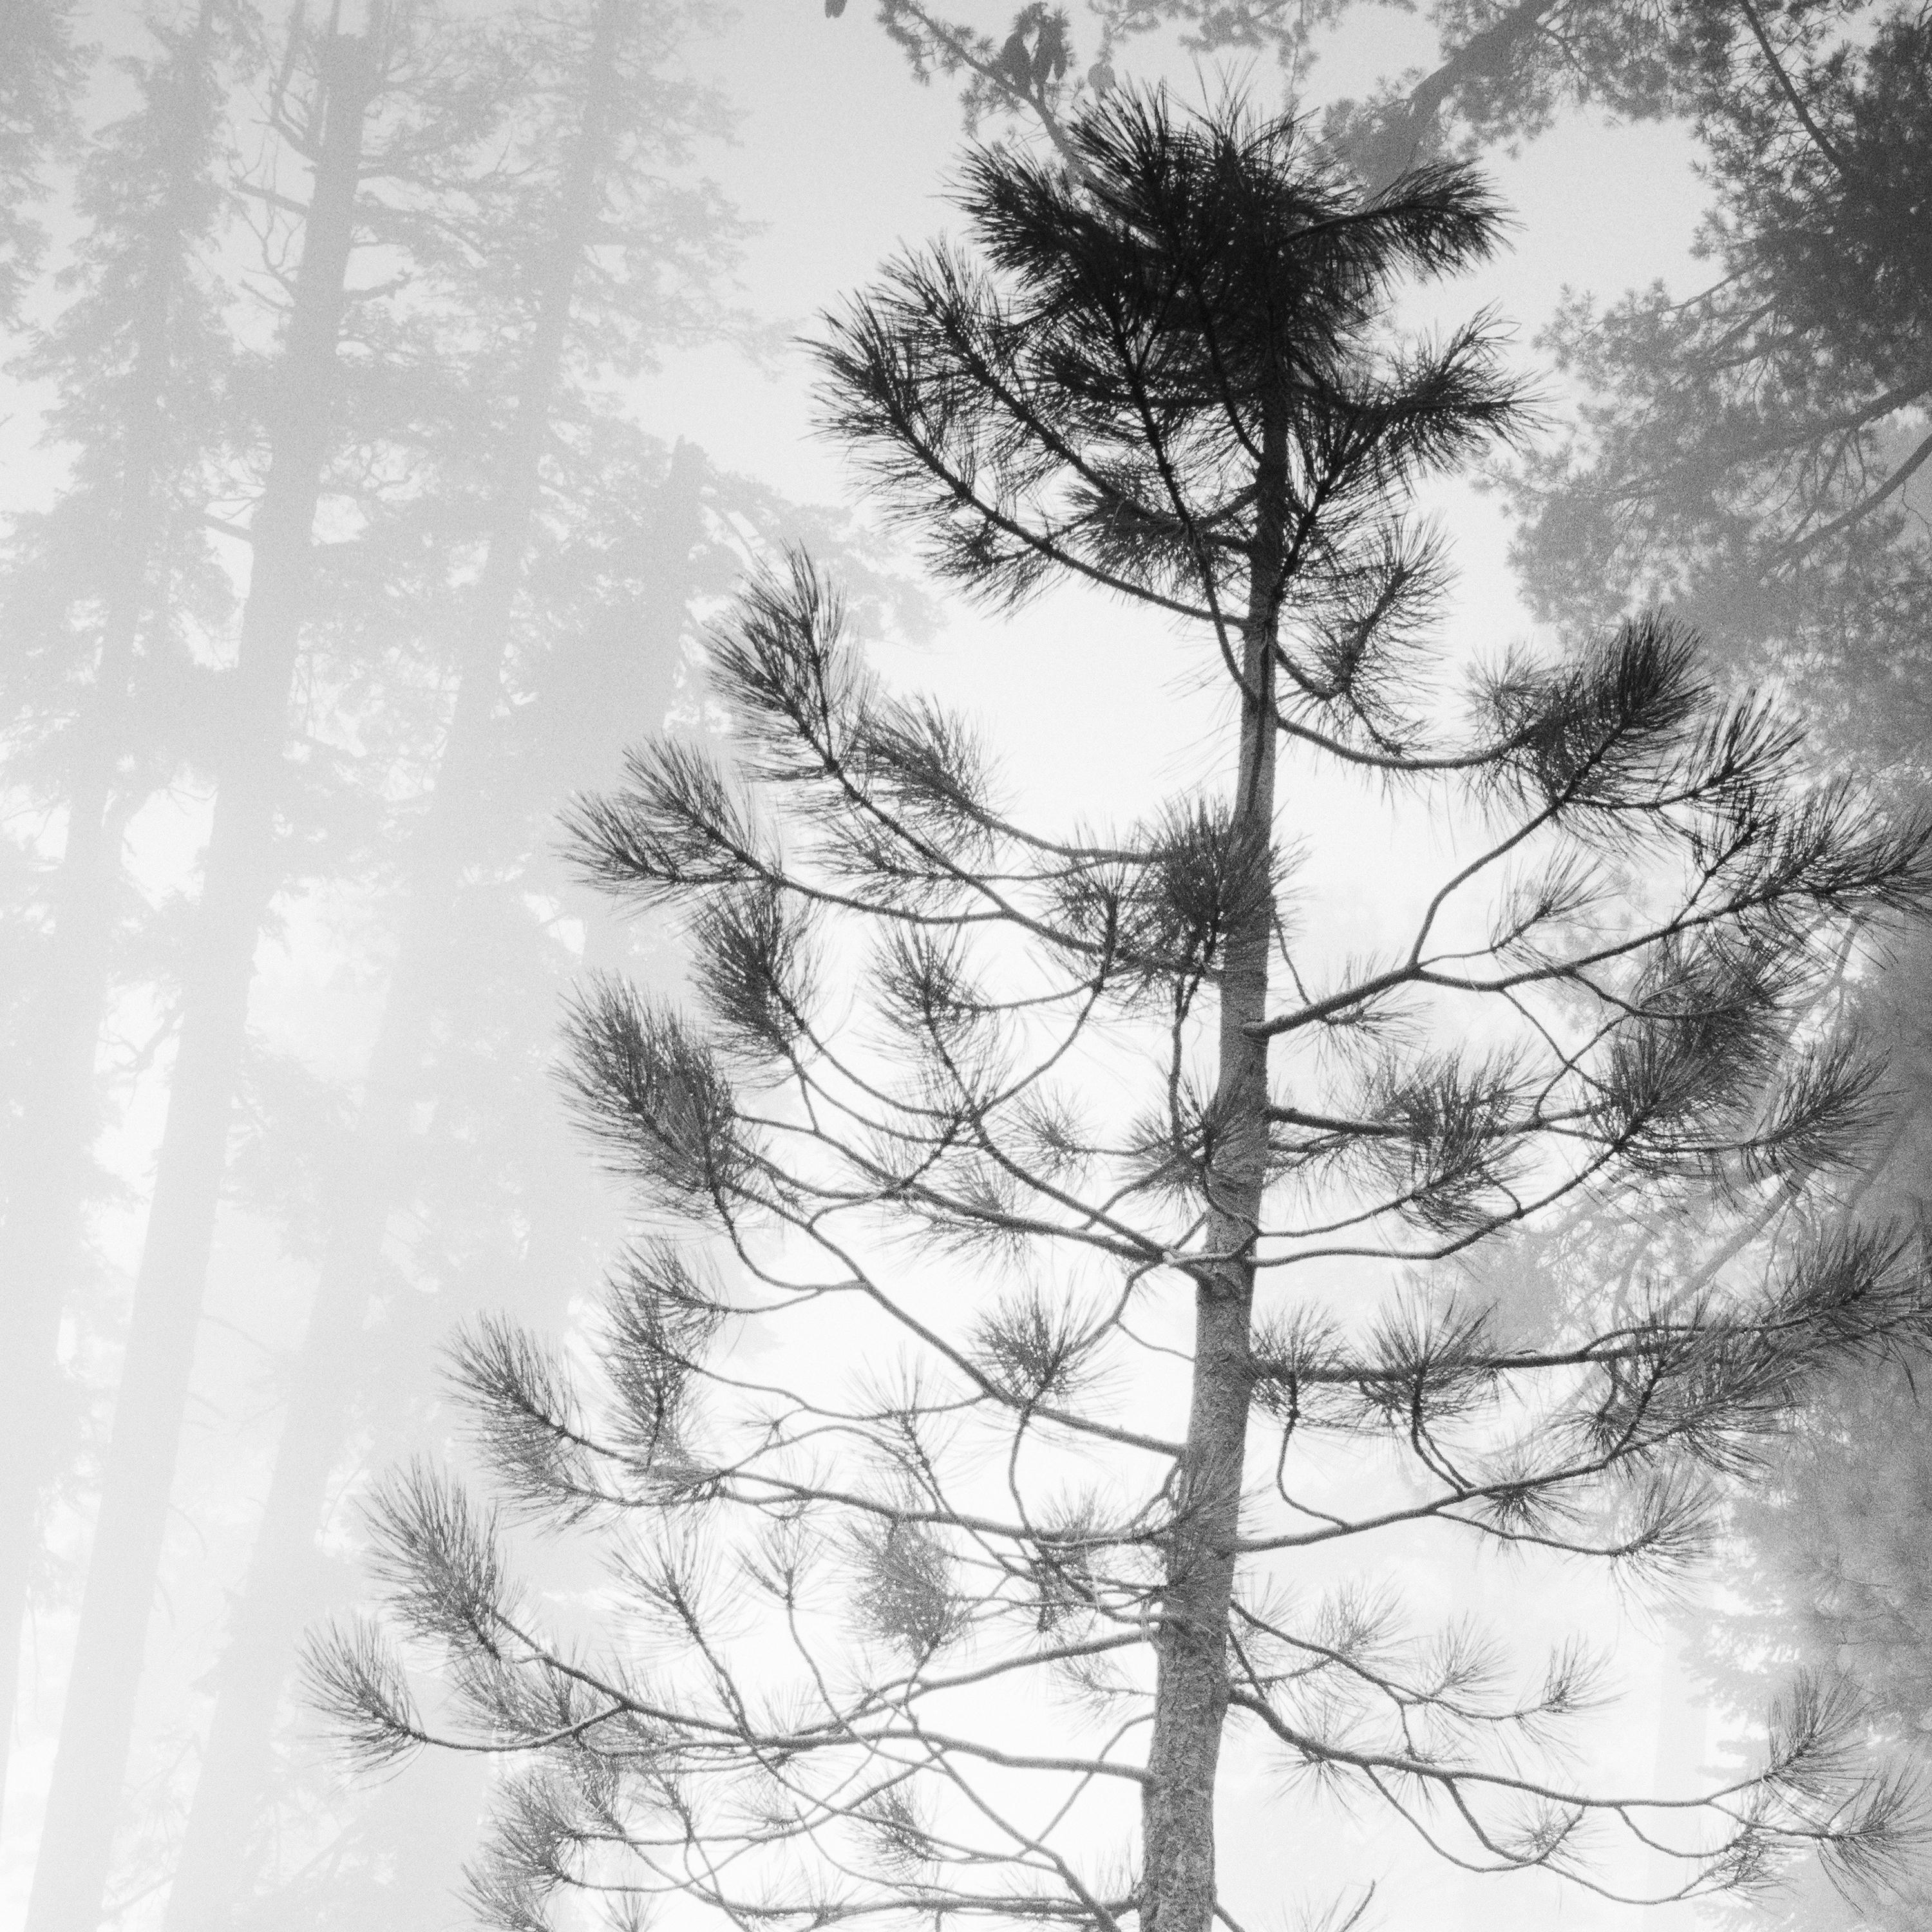 Into the Wild, Redwood, foggy, California, USA, b&w art landscape photography For Sale 1